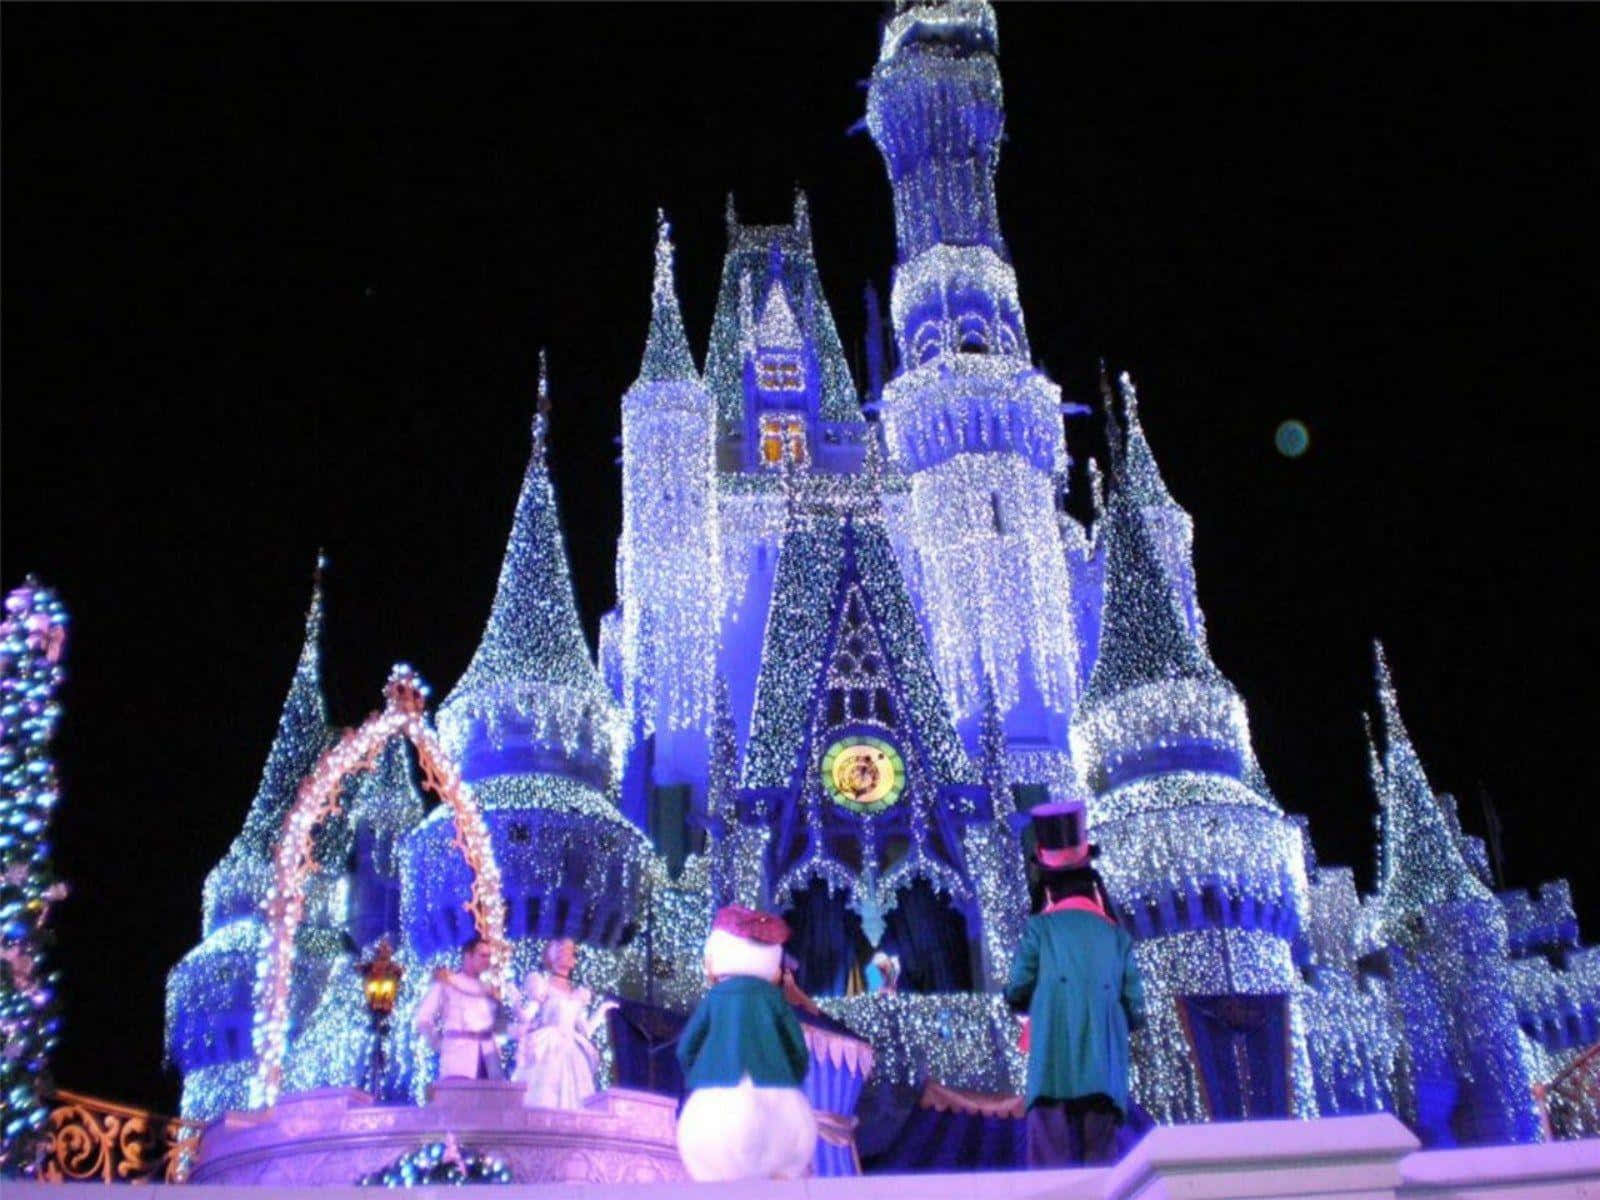 Celebrate the Holidays with Disney this Christmas!